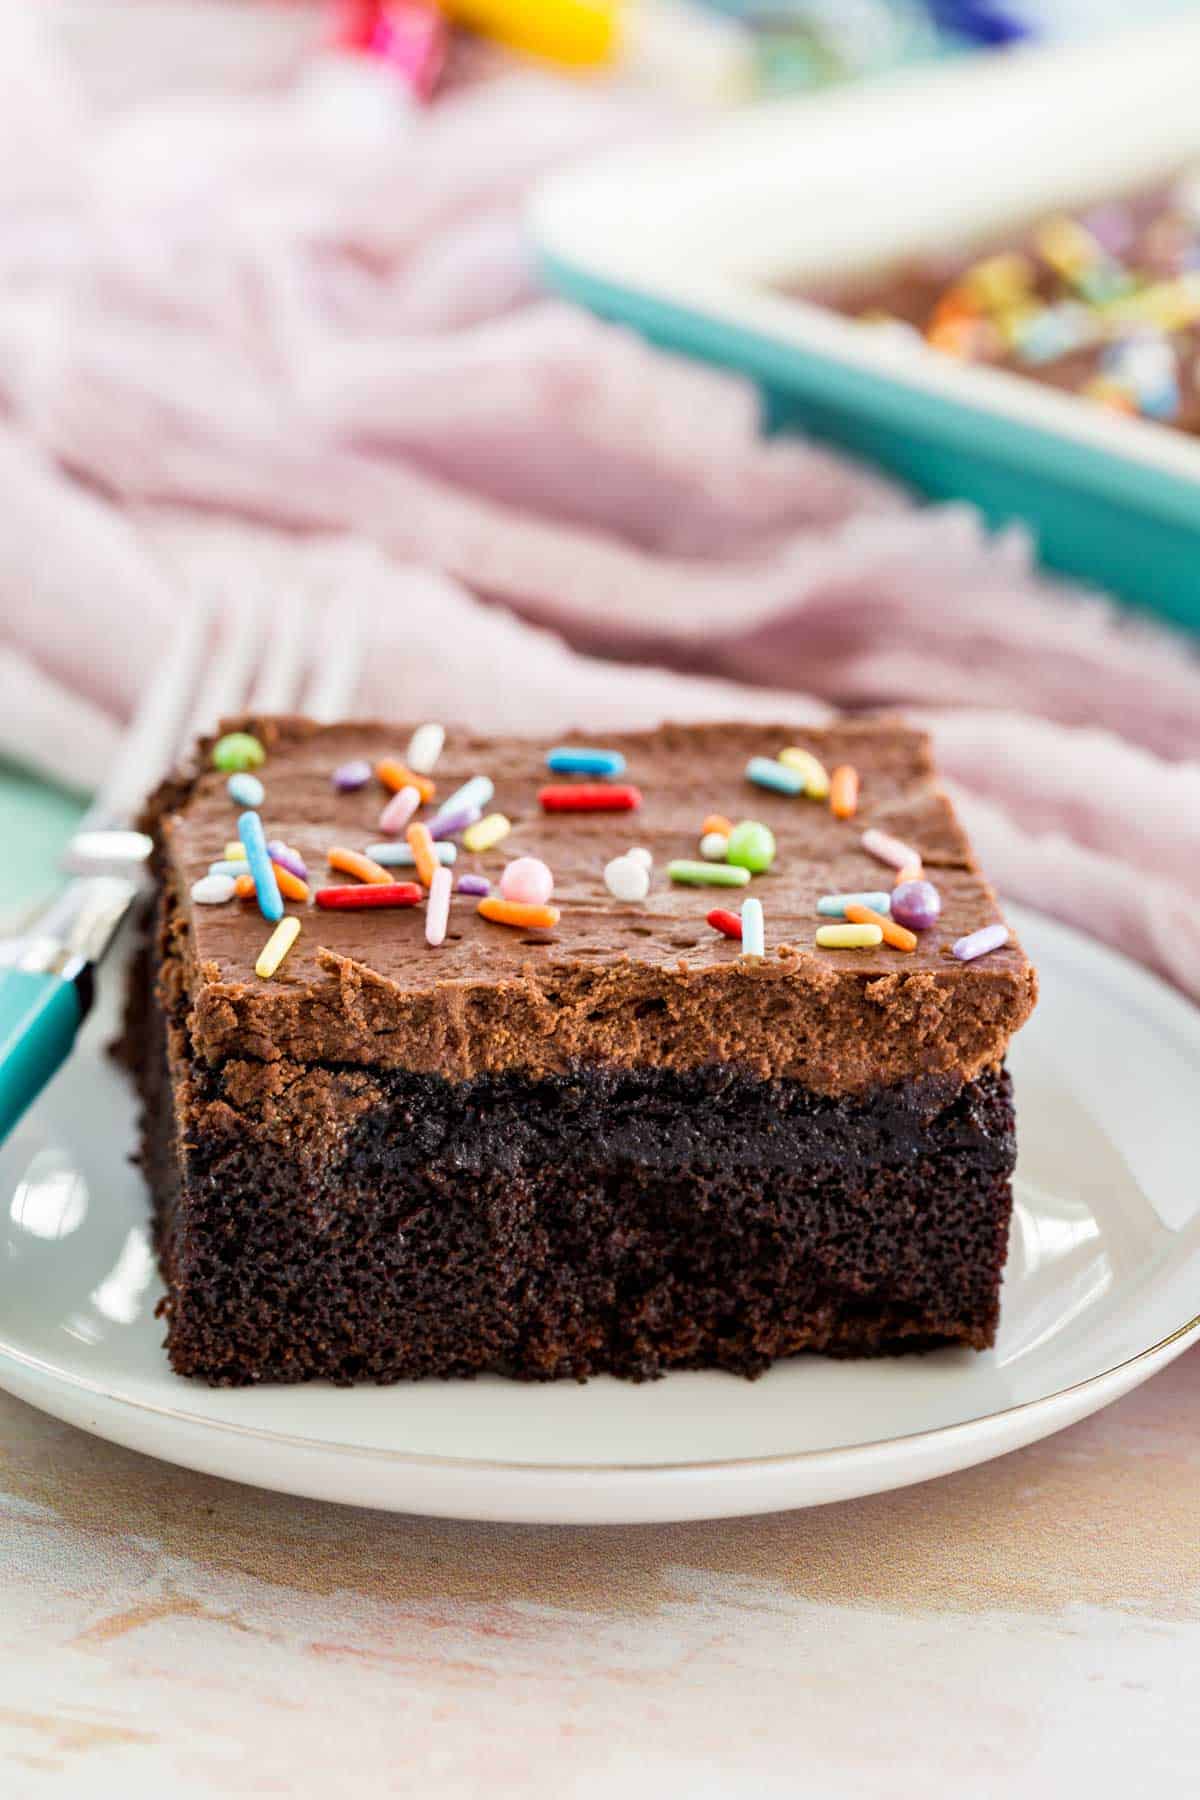 A square slice of chocolate cake with sprinkles on a plate.